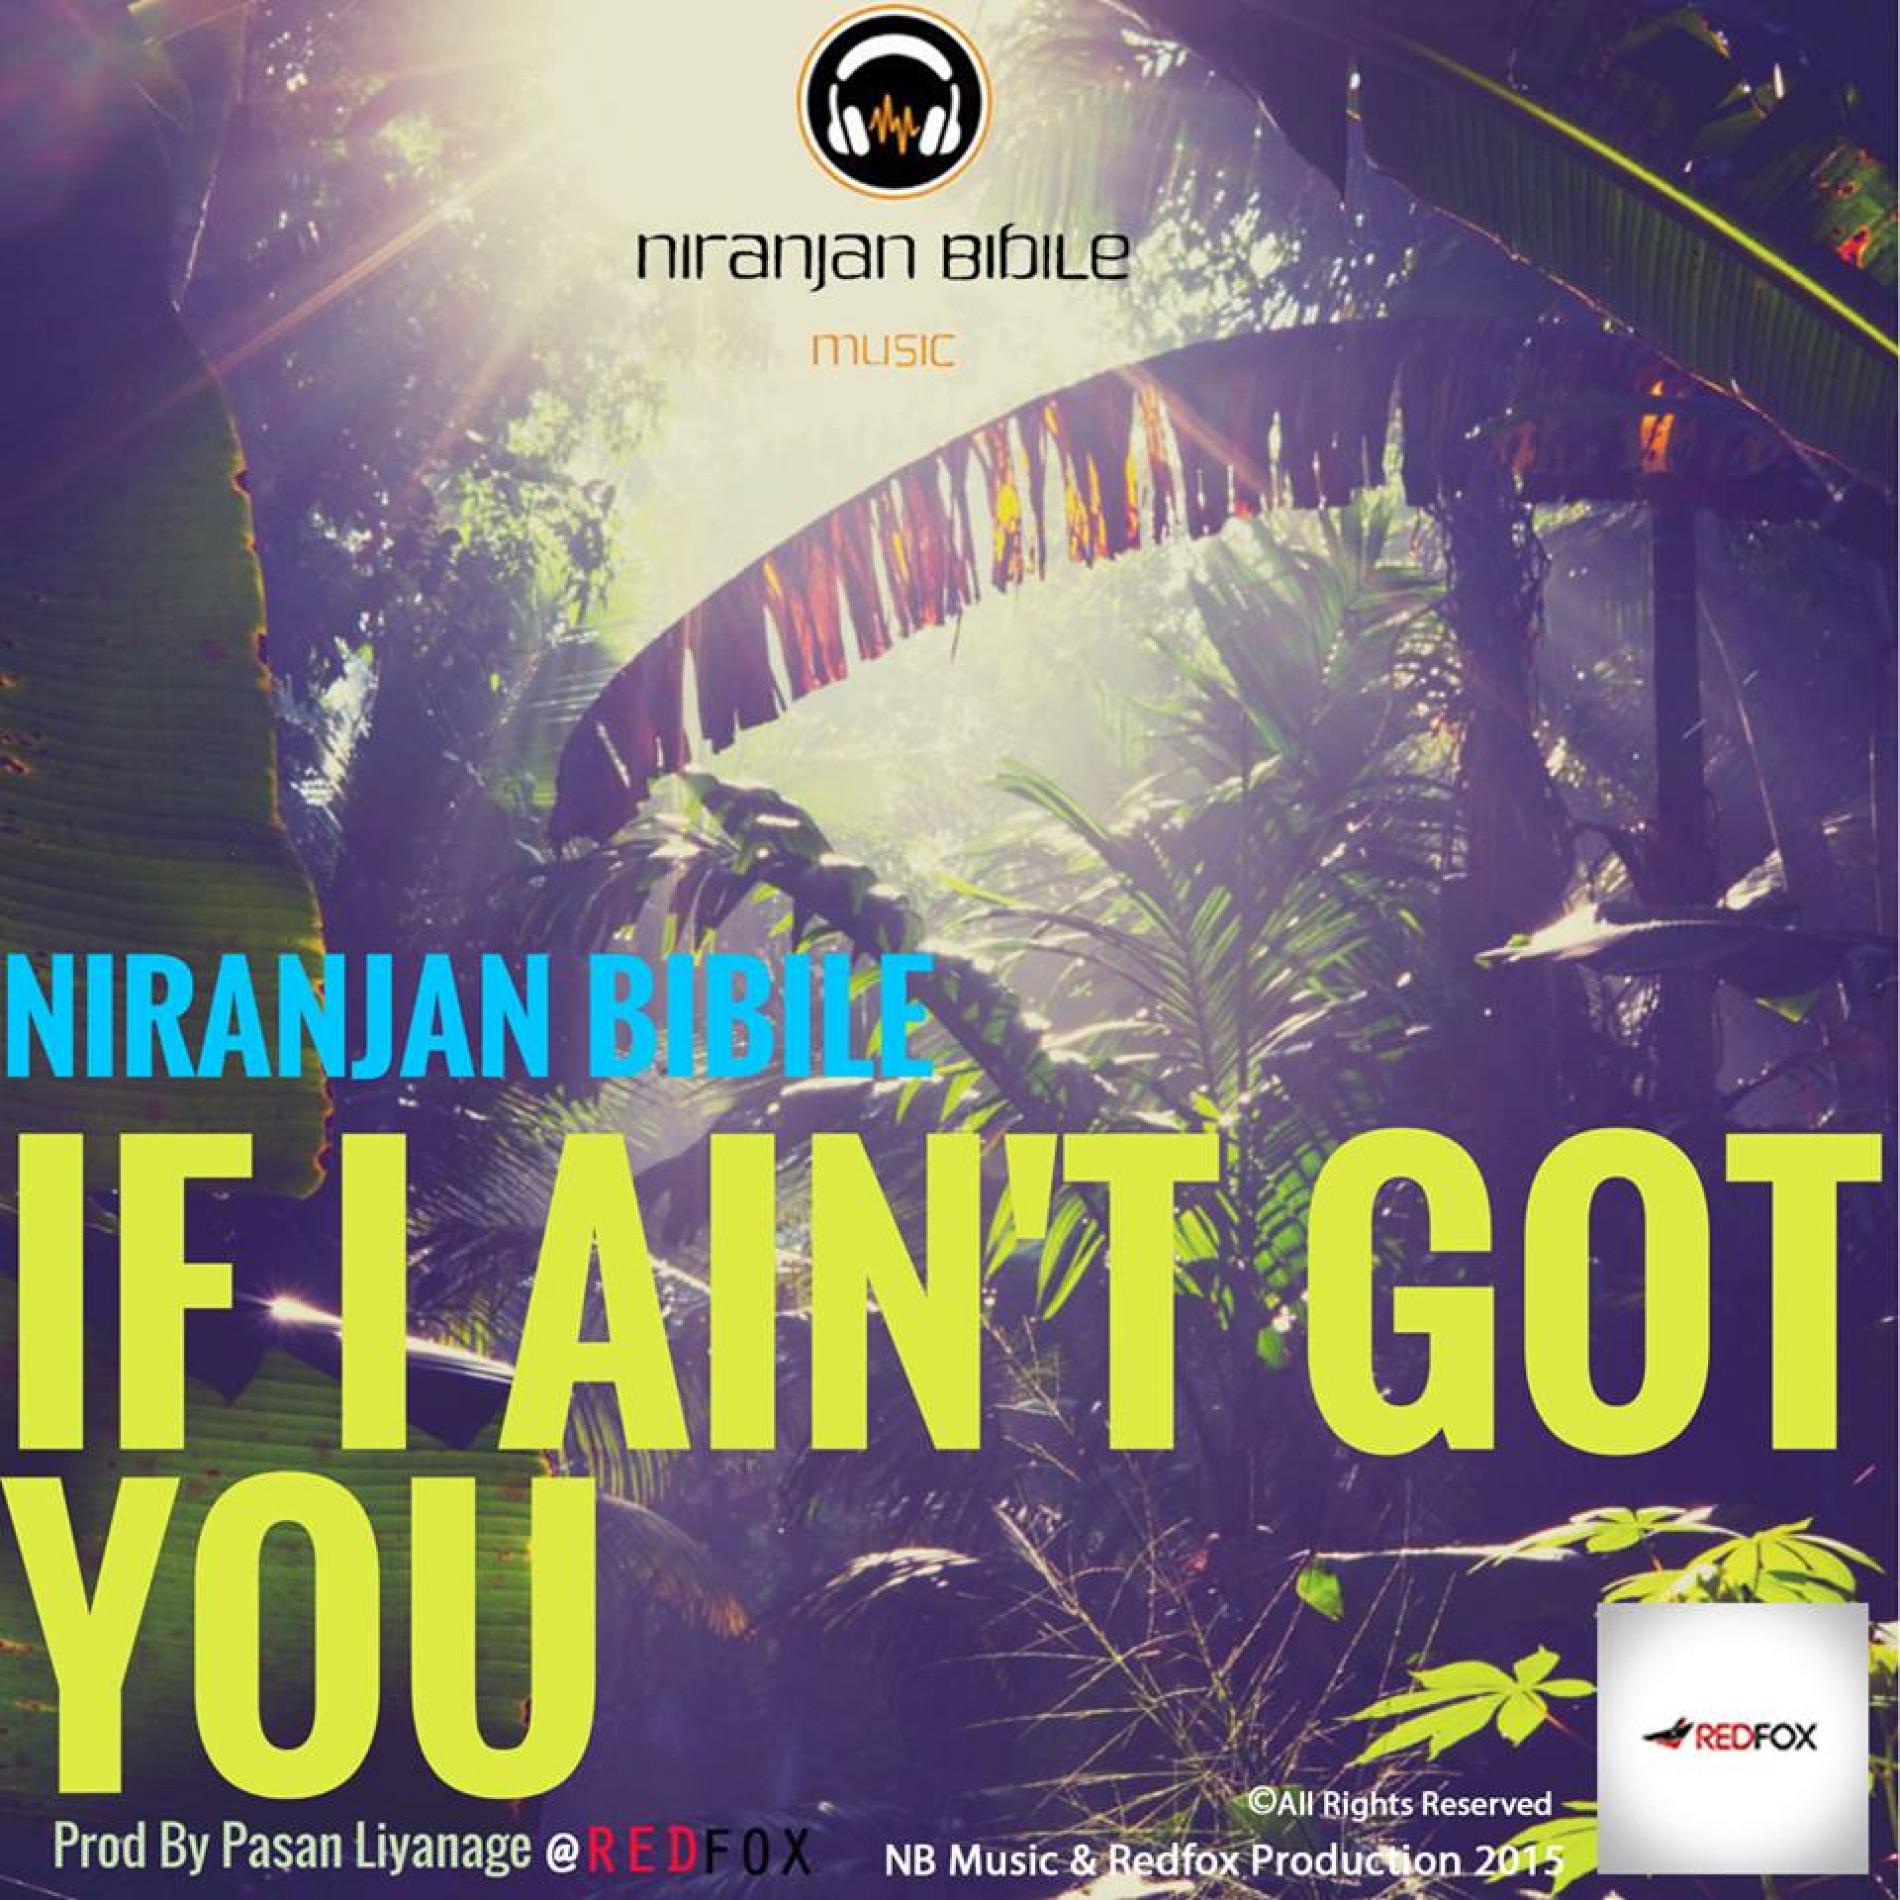 Niranjan’s Got Solo Material Coming Out Soon!